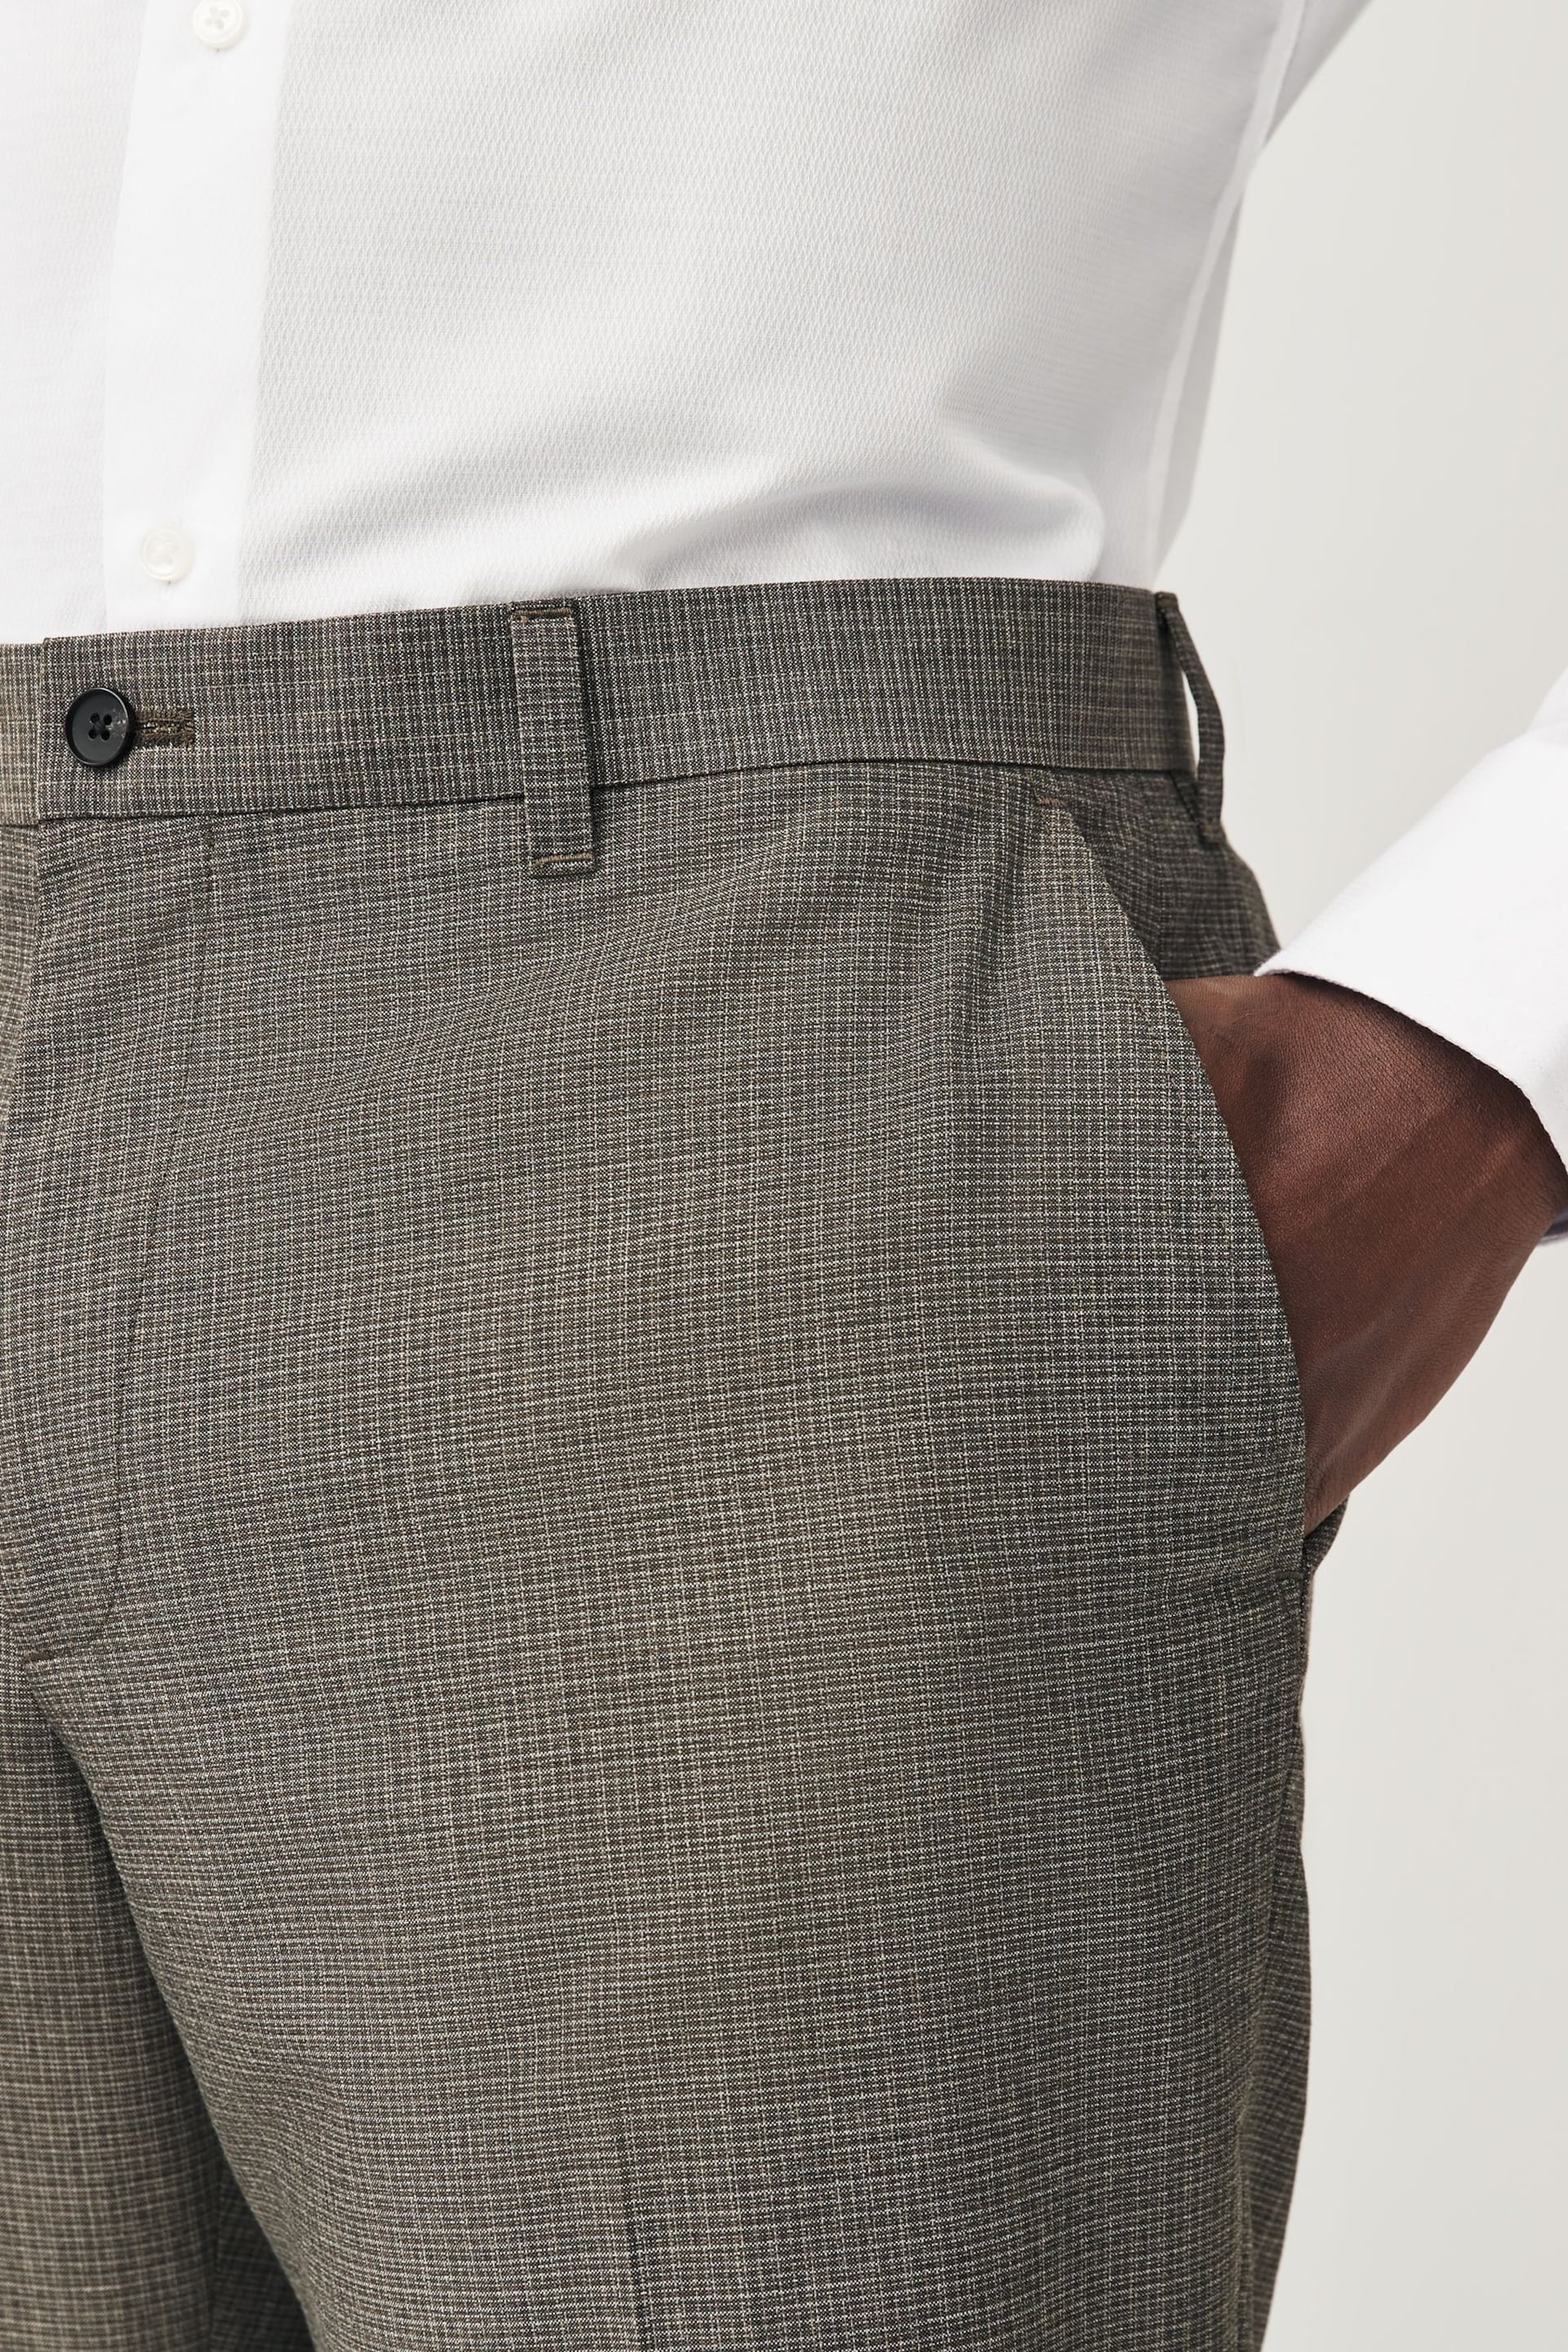 Neutral Textured Smart Trousers - Image 4 of 8